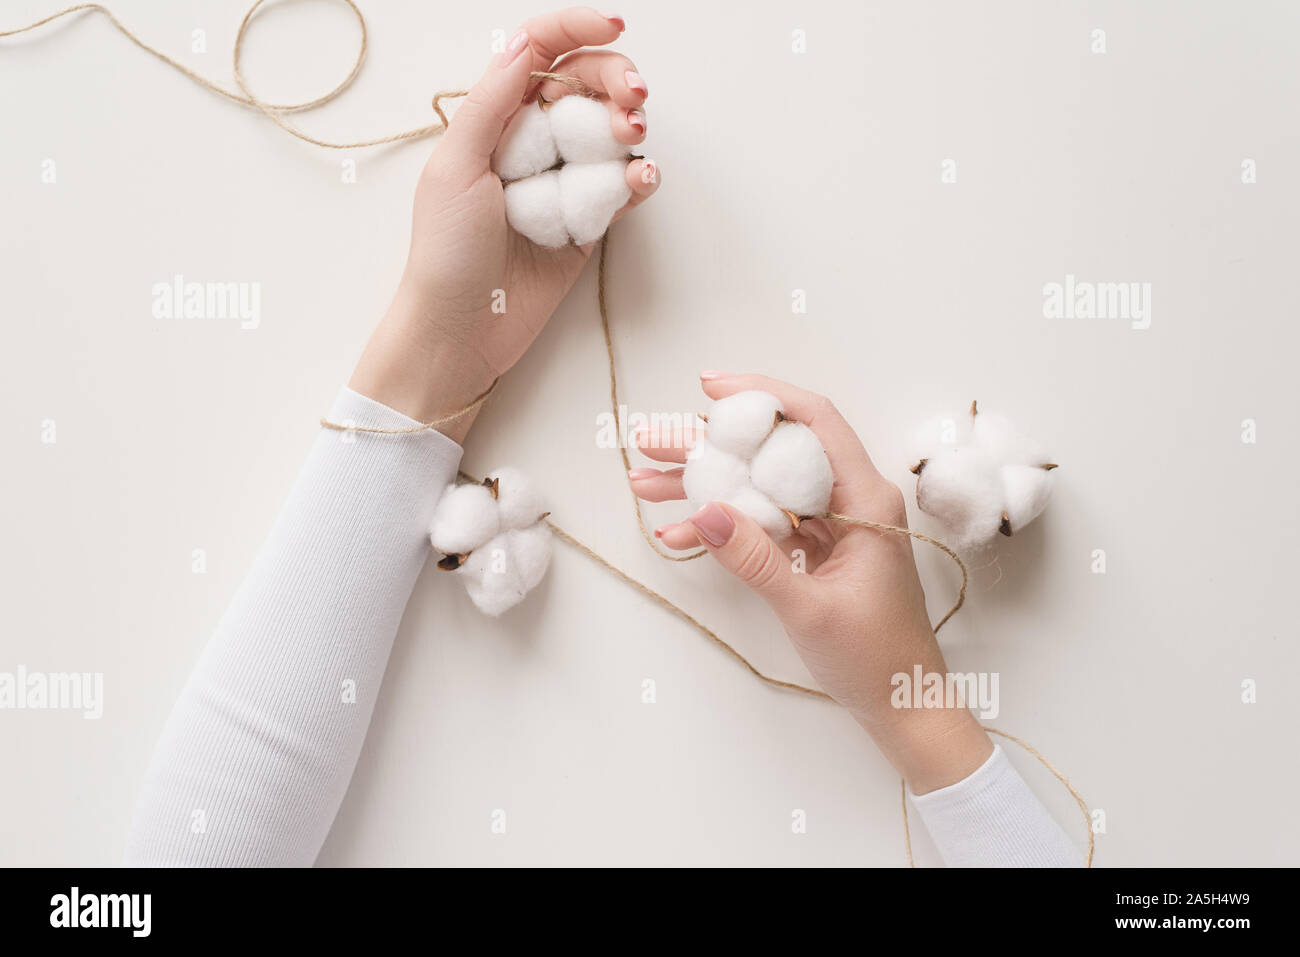 Girl's hand on a white background with the colors of the cotton. Tenderness and care for the skin, the concept of rejuvenation and anti-aging creams and procedures. Sewing the concept, the manufacture of cotton fabrics. Stock Photo